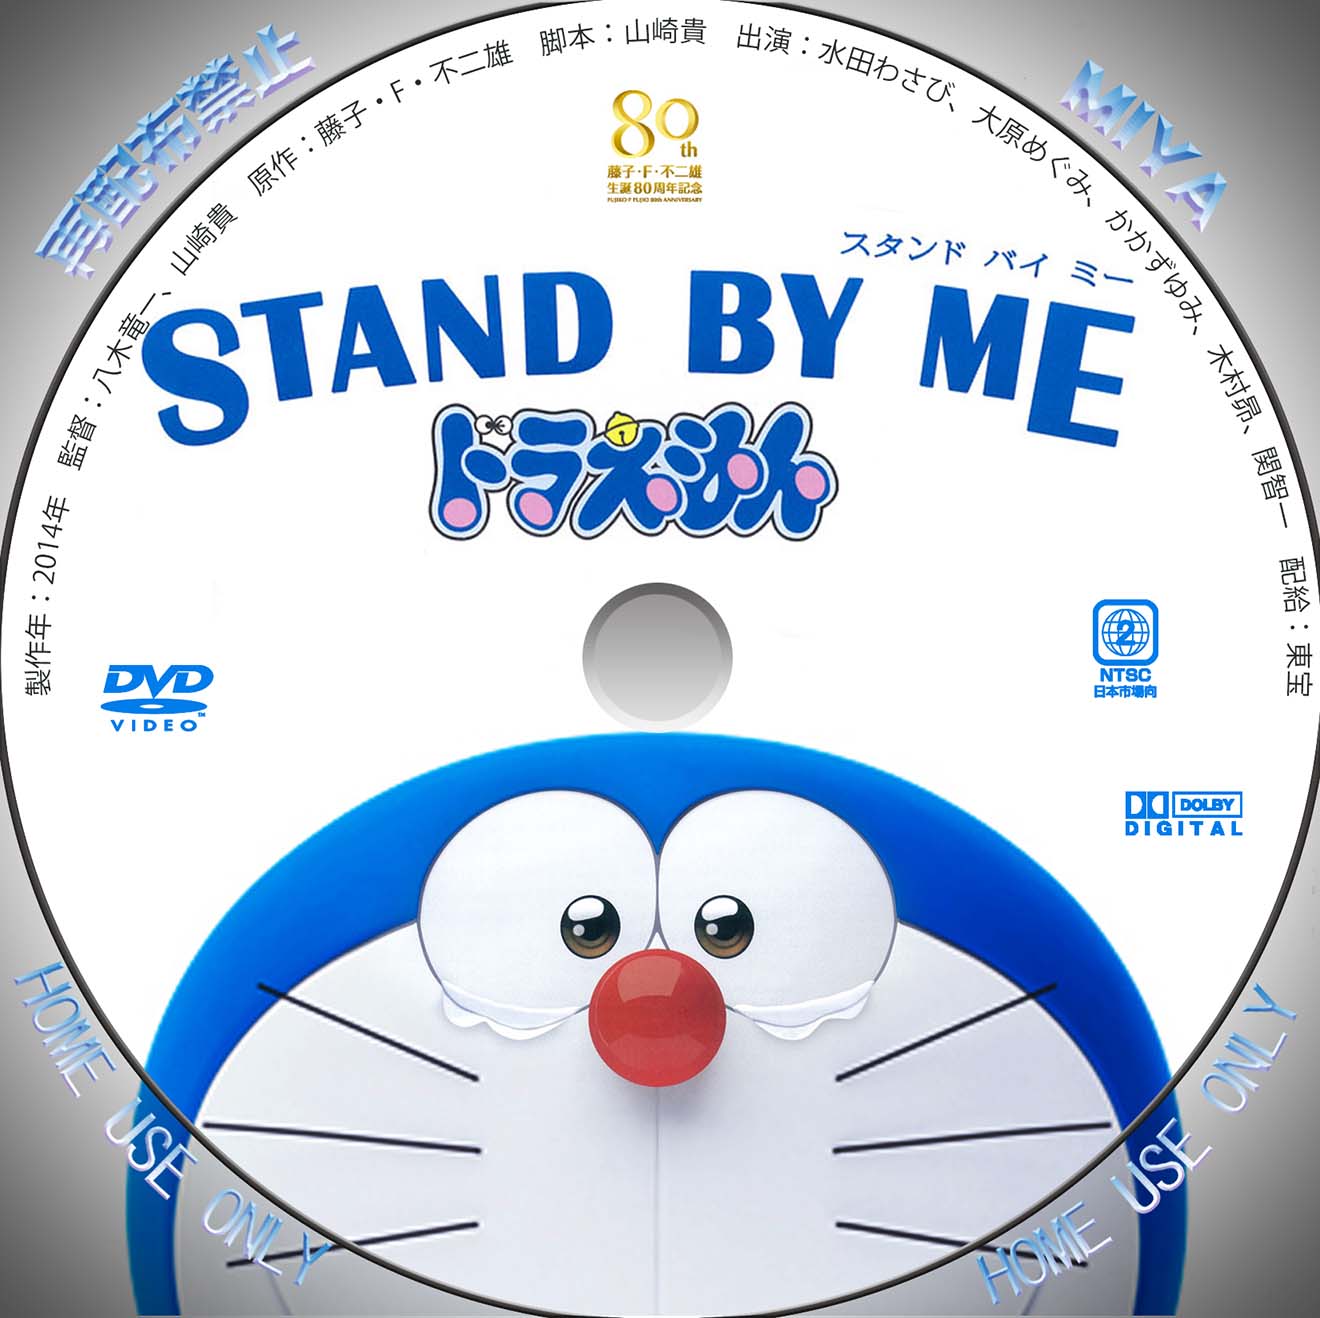 Stand By Me ドラえもんdvd レーベル